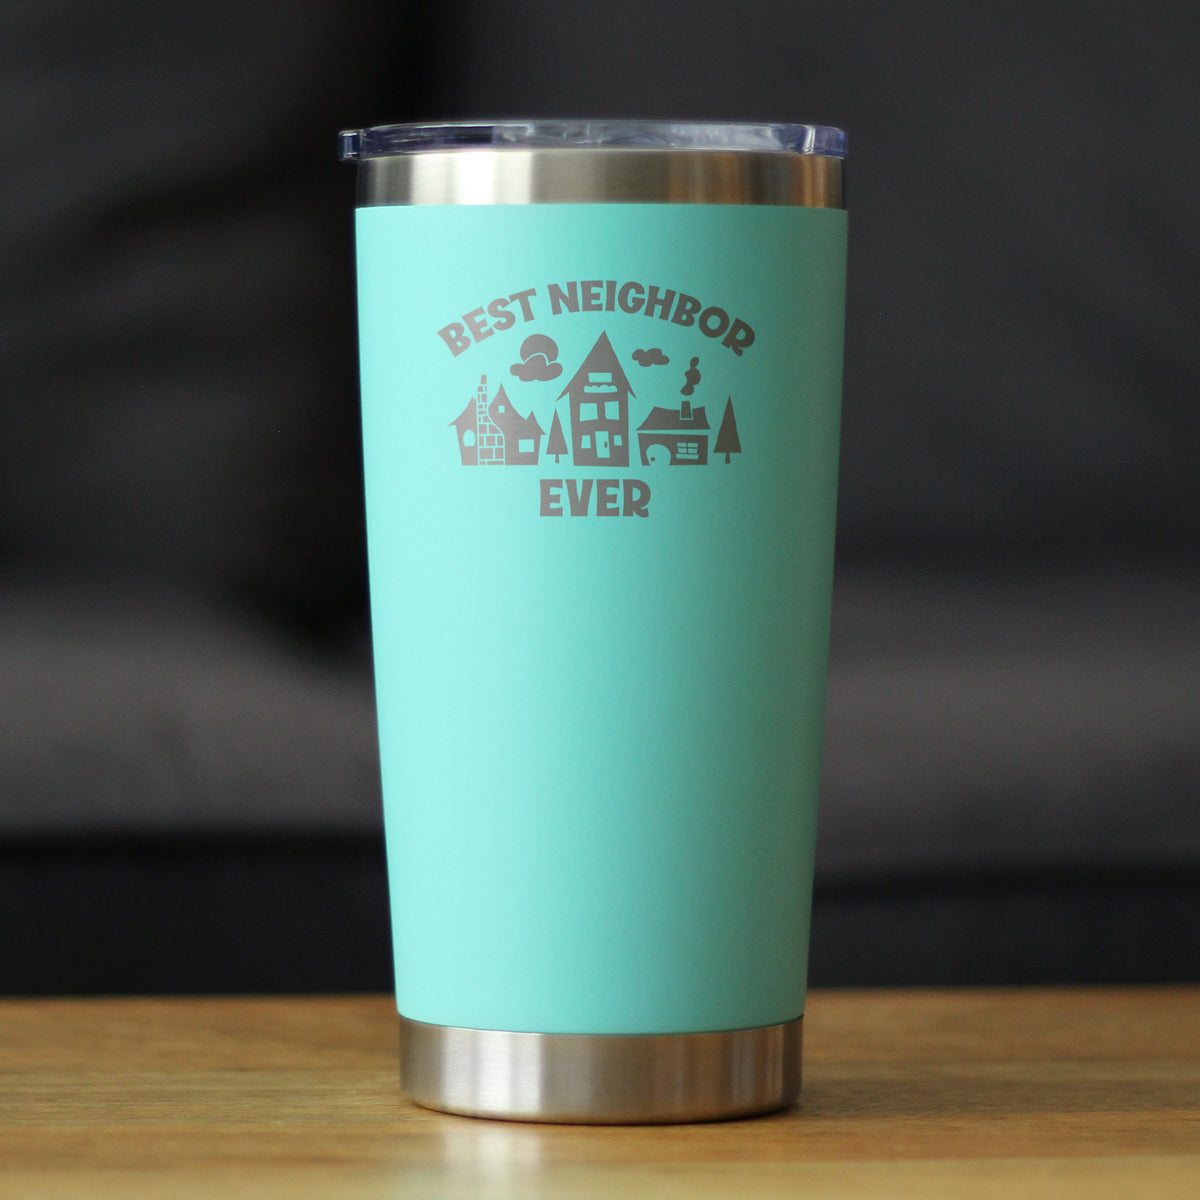 Best Neighbor Ever - Insulated Coffee Tumbler Cup with Sliding Lid - Stainless Steel Travel Mug - Fun Neighbor Gifts